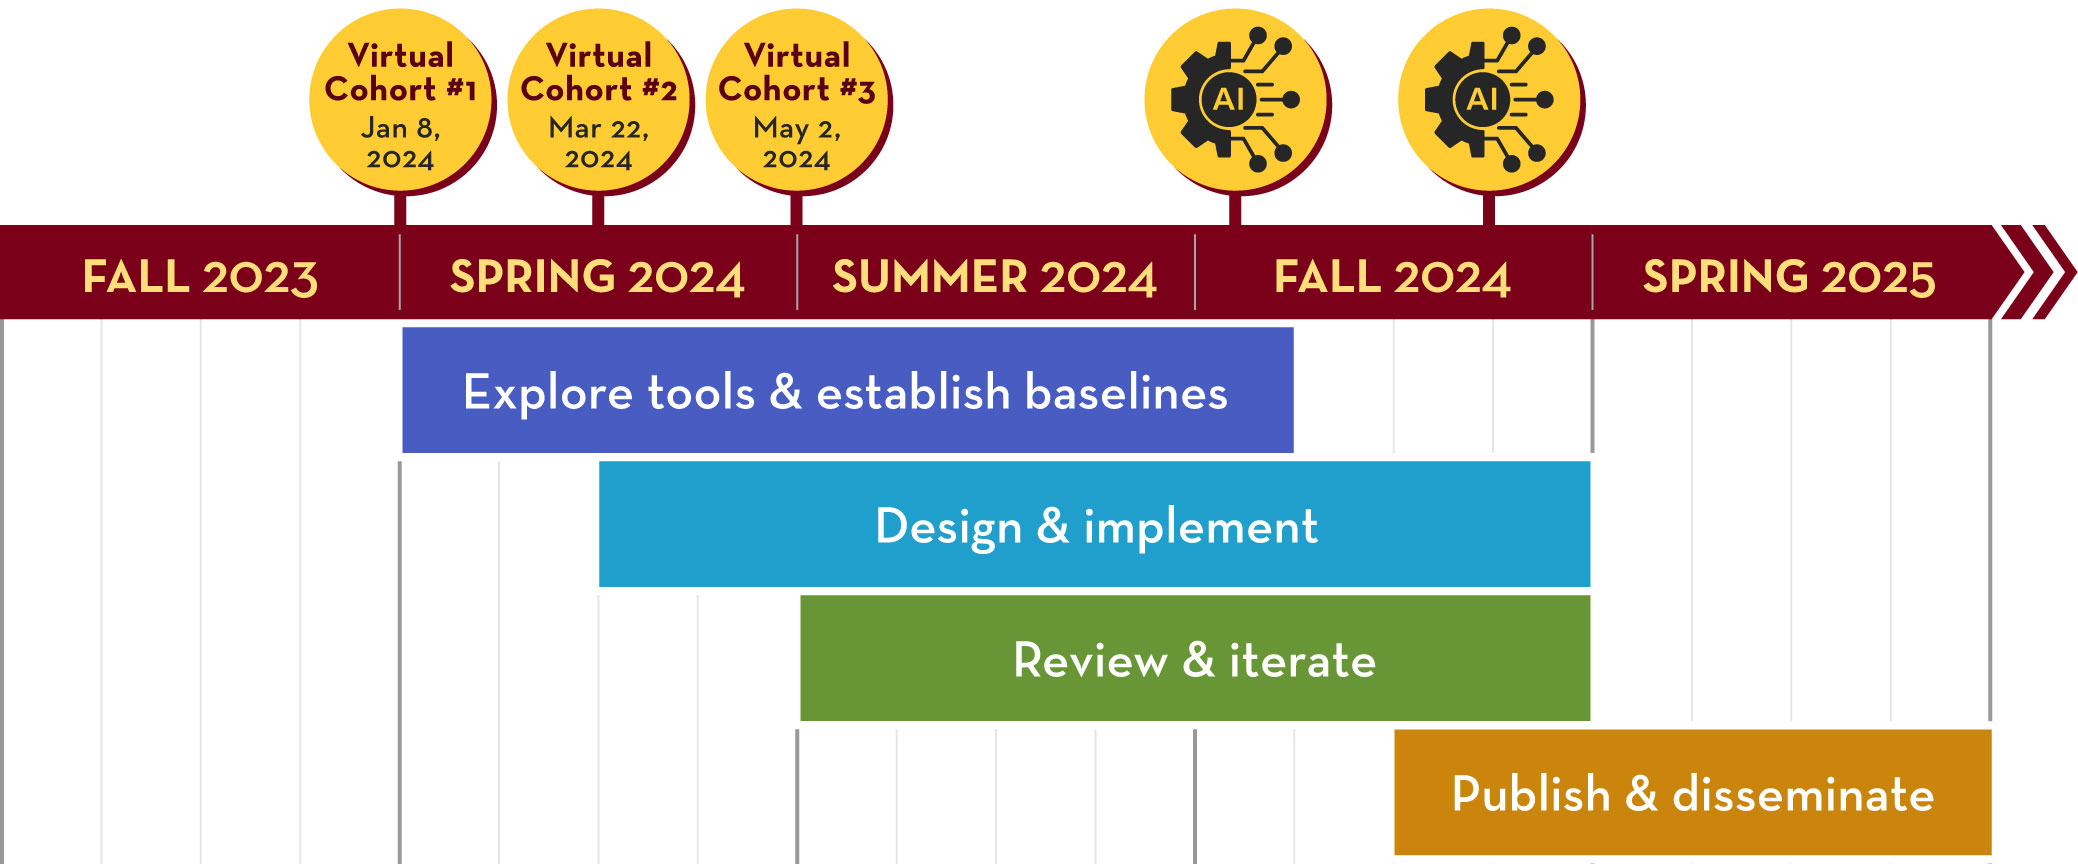 From spring 2024 to the beginning of fall 2024, fellows will explore tools and establish baselines; they will design and implement their plans beginning in the middle of spring 2024 through the end of fall 2024; they will review and iterate their plans from summer 2024 through the end of fall 2024; they will publish and disseminate their work towards the end of fall 2024 through spring 2025